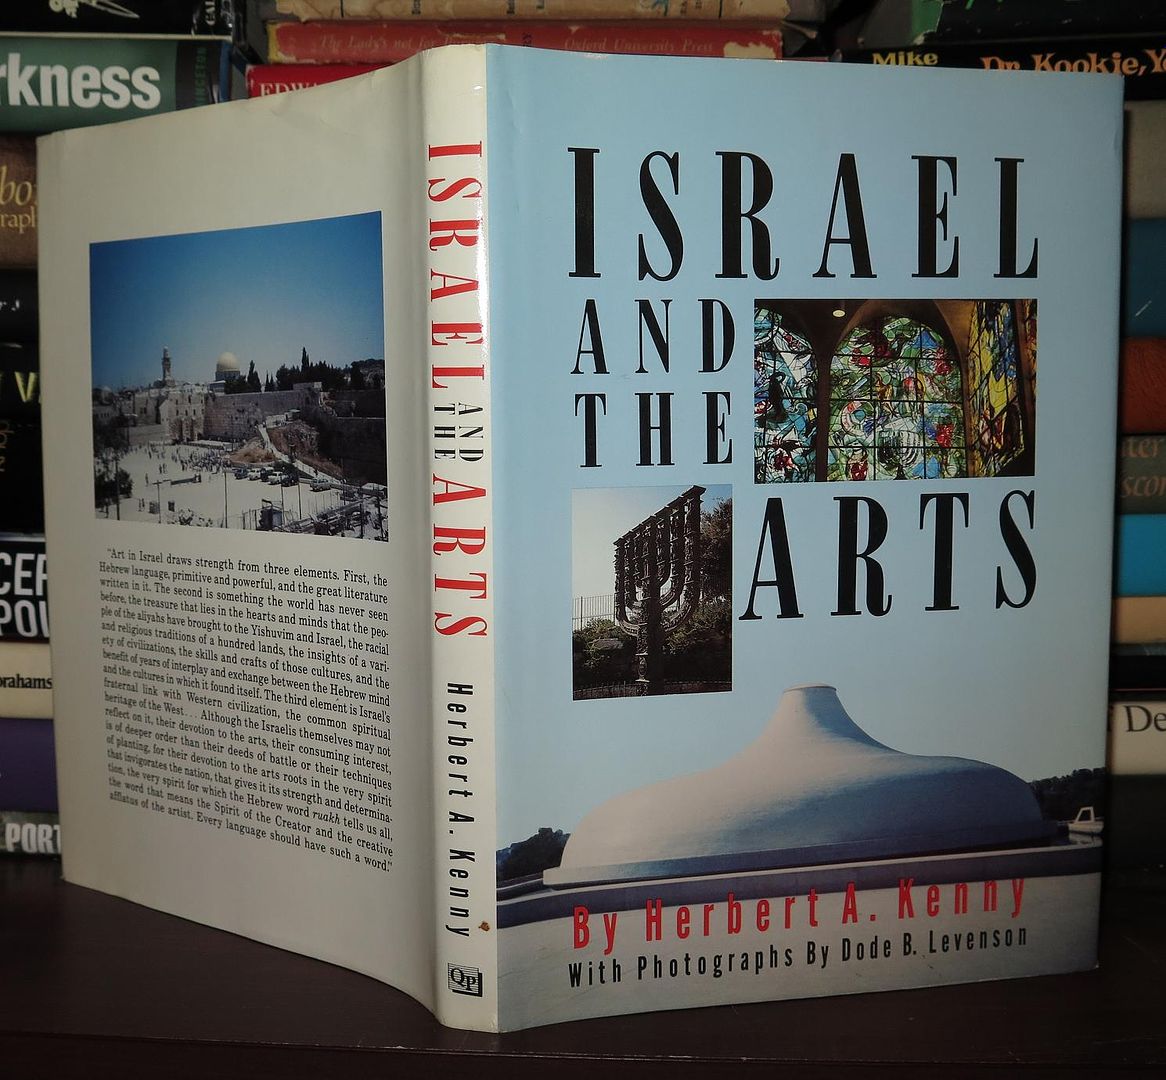 KENNY, HERBERT A. - Israel and the Arts